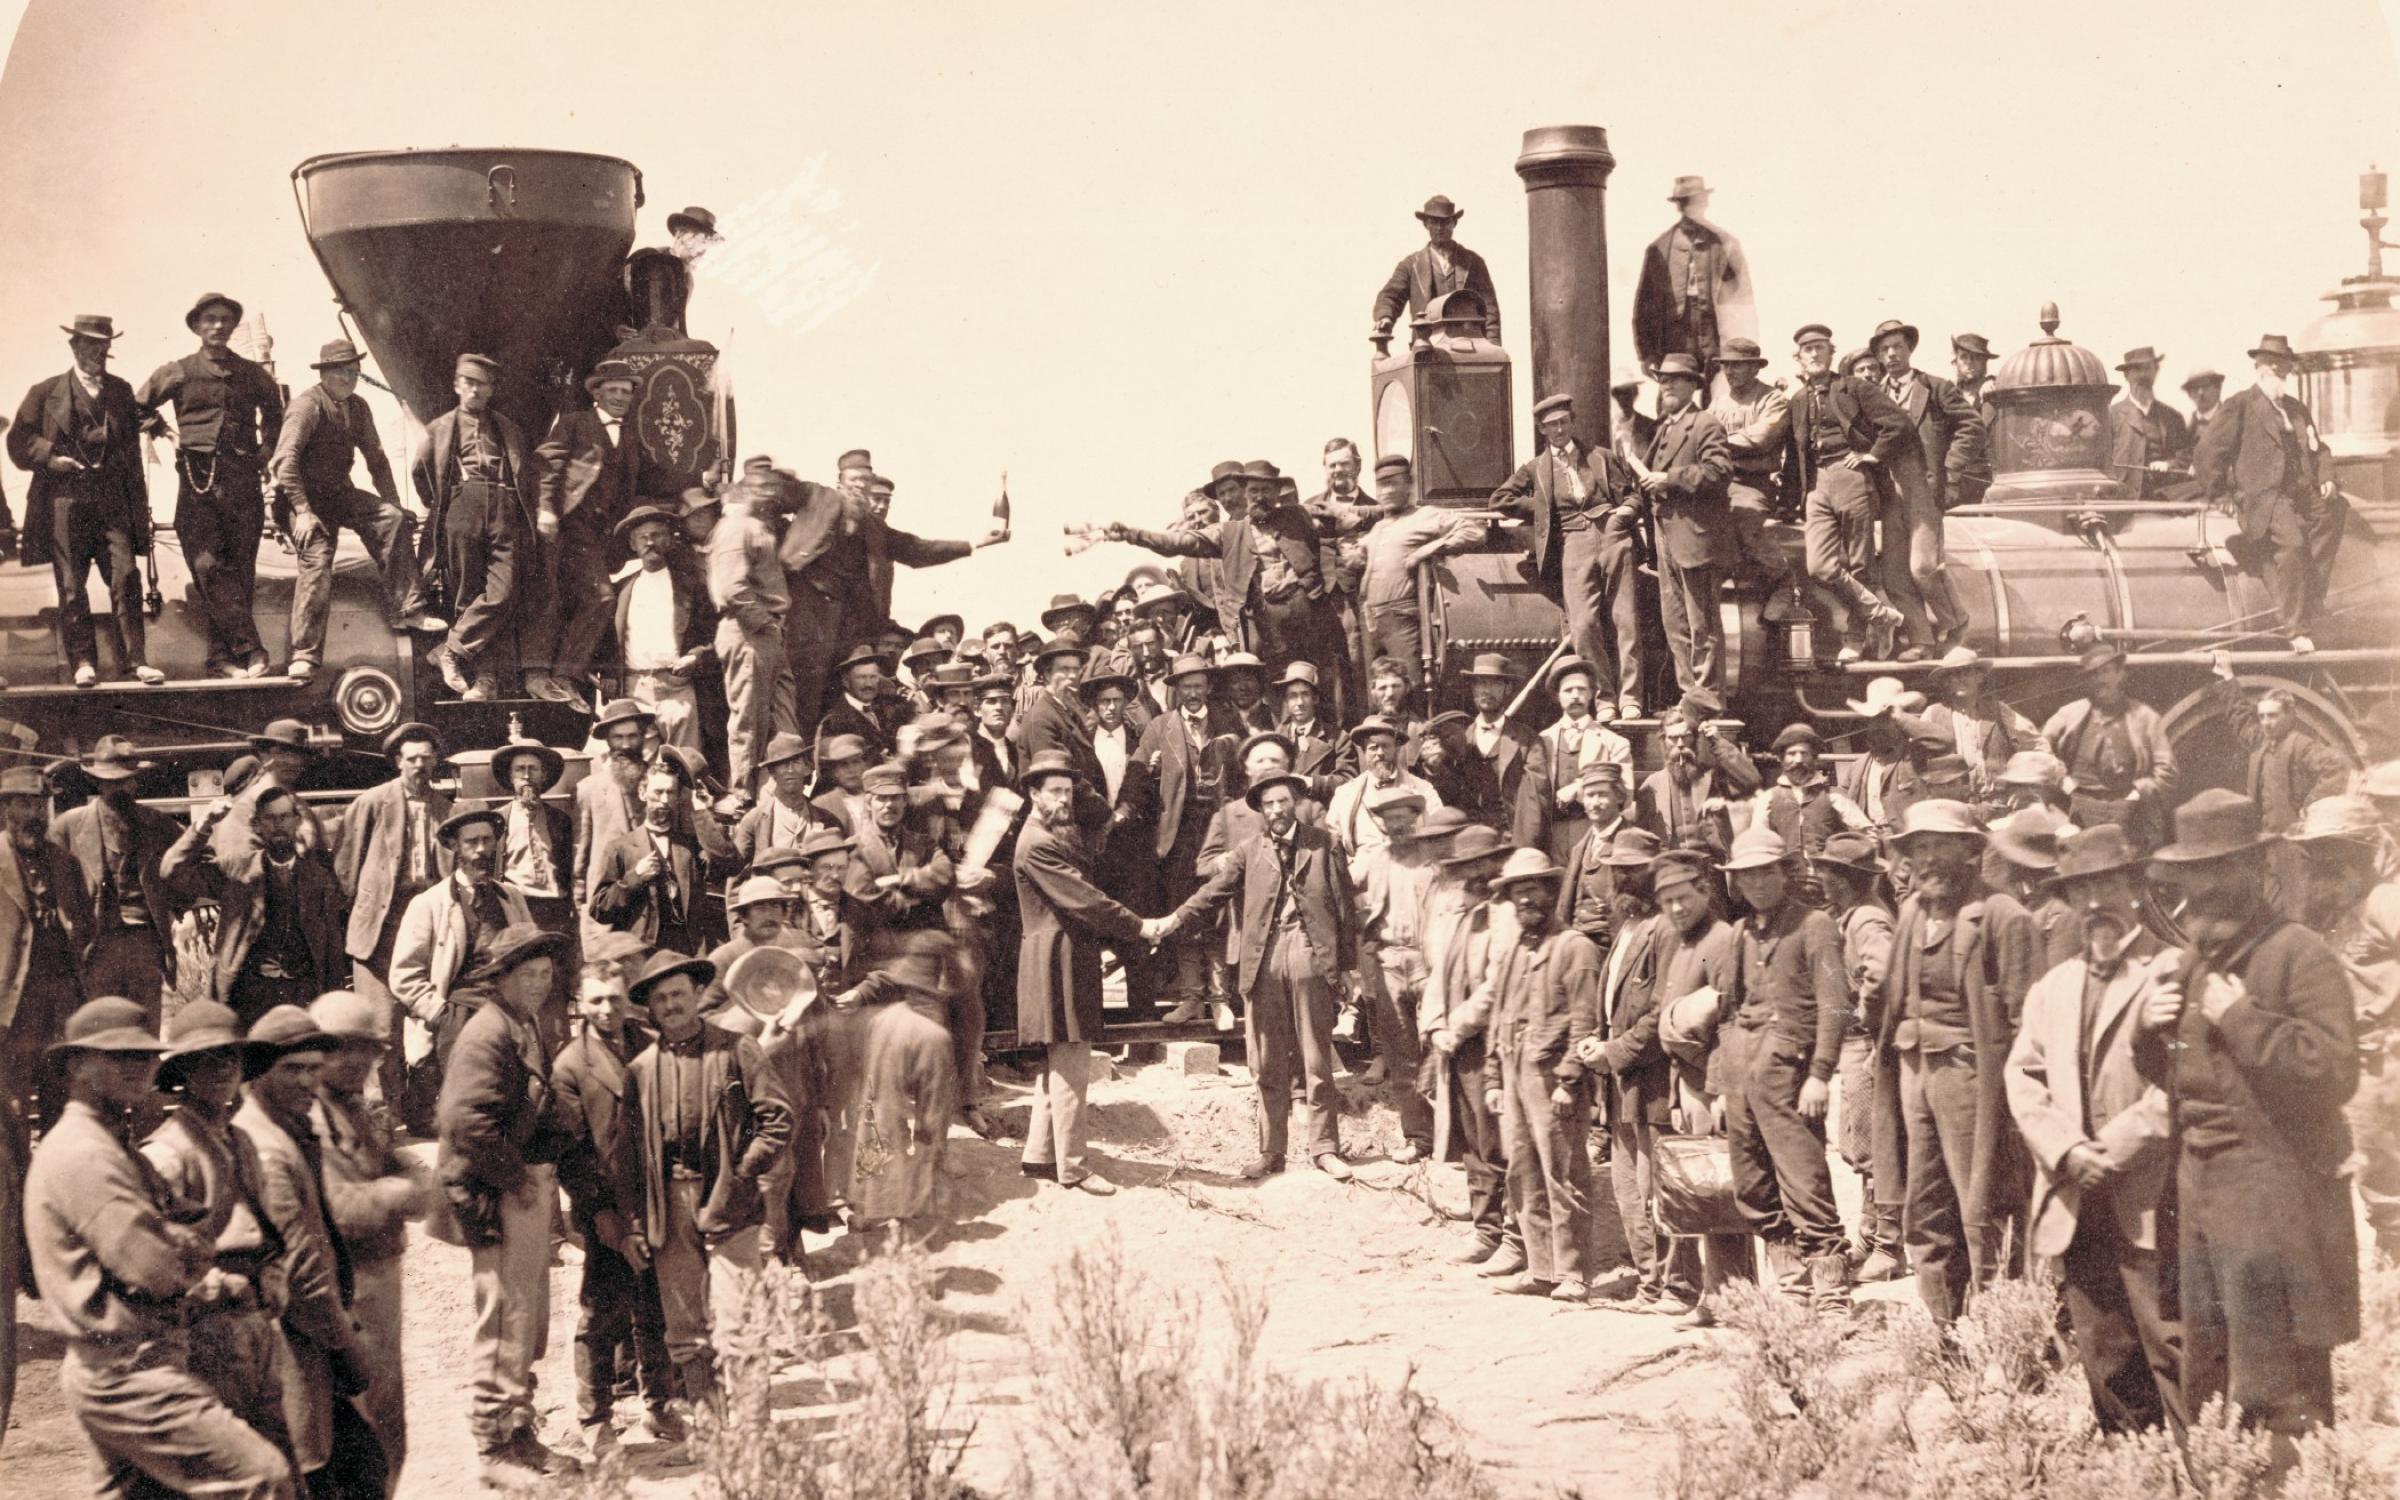 Andrew J. Russell (American, 1830­1902), East and West Shaking Hands at Laying Last Rail, 1869, albumen print, courtesy Union Pacific Railroad Museum. The ceremony spotlighted Union Pacific locomotive No. 119 meeting Central Pacific locomotive Jupiter. From left, shaking hands, are Samuel S. Montague, chief engineer of the Central Pacific Railroad, and General Grenville M. Dodge, chief engineer of the Union Pacific Railroad. 